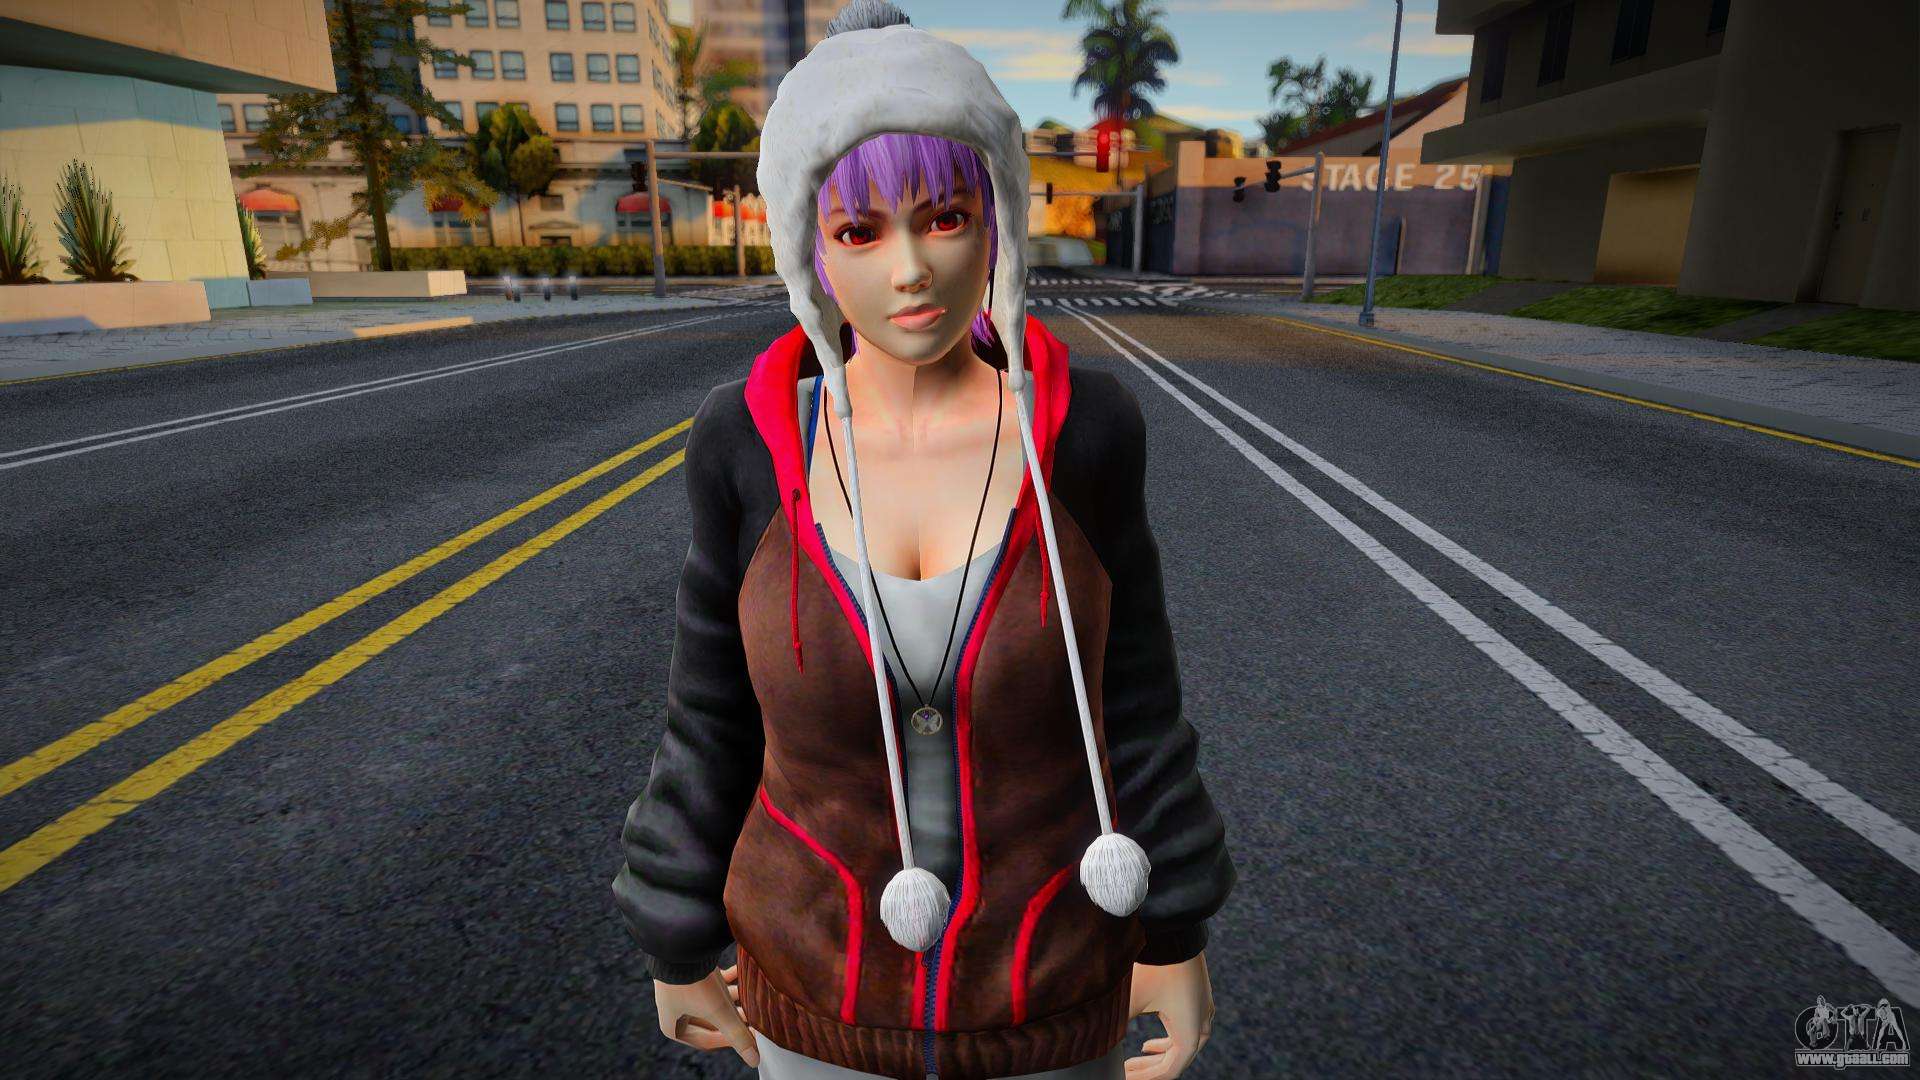 Dead Or Alive 5 - Ayane (Costume 4) 10 for GTA San Andreas